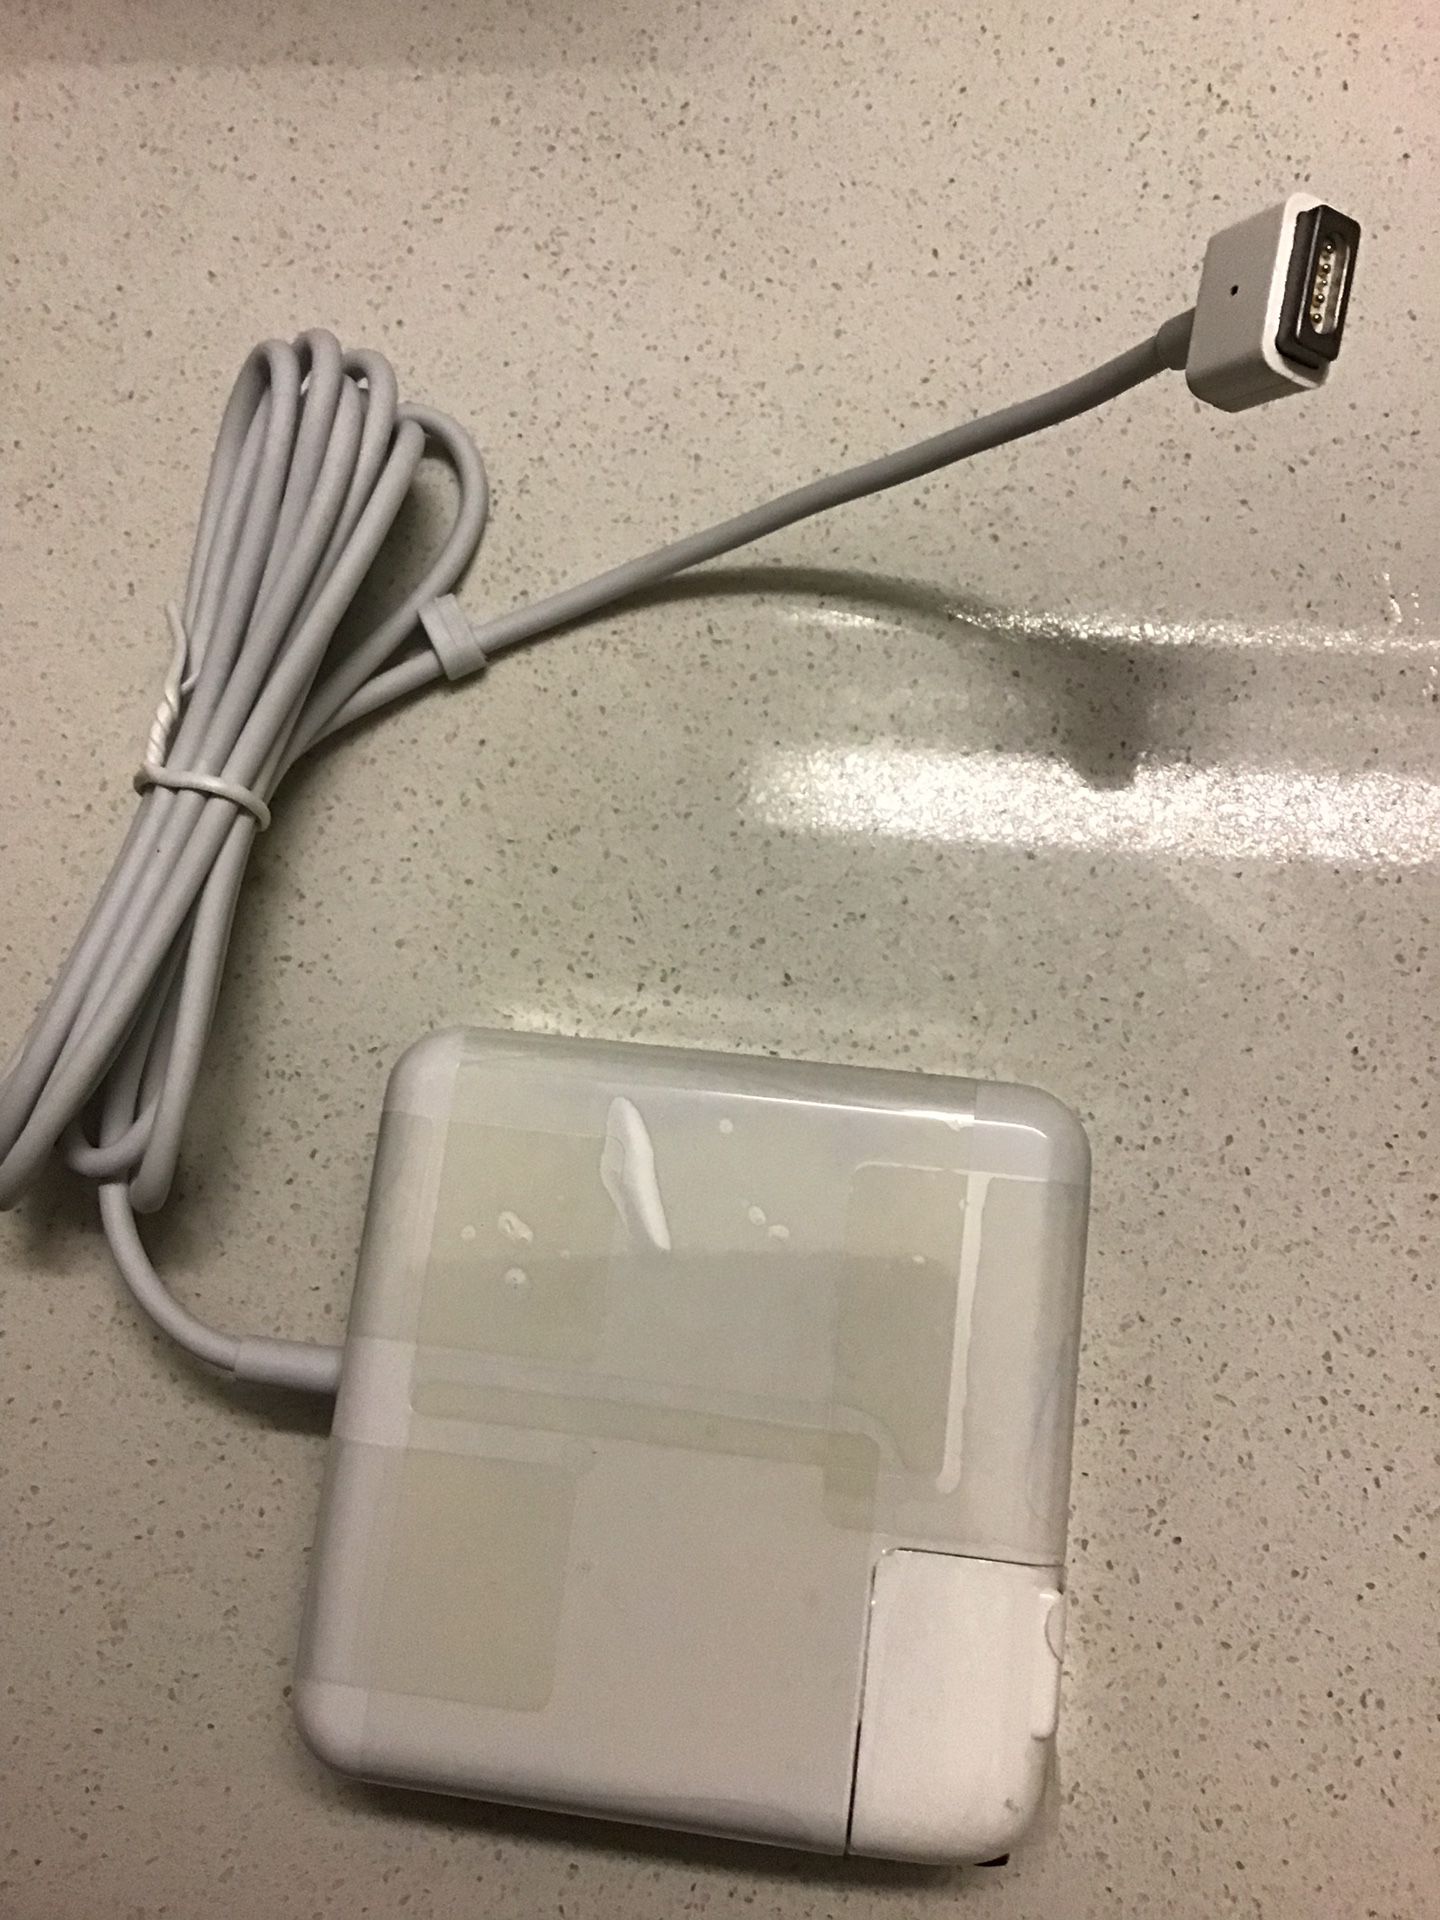 NEW MacBook Pro charger 60W